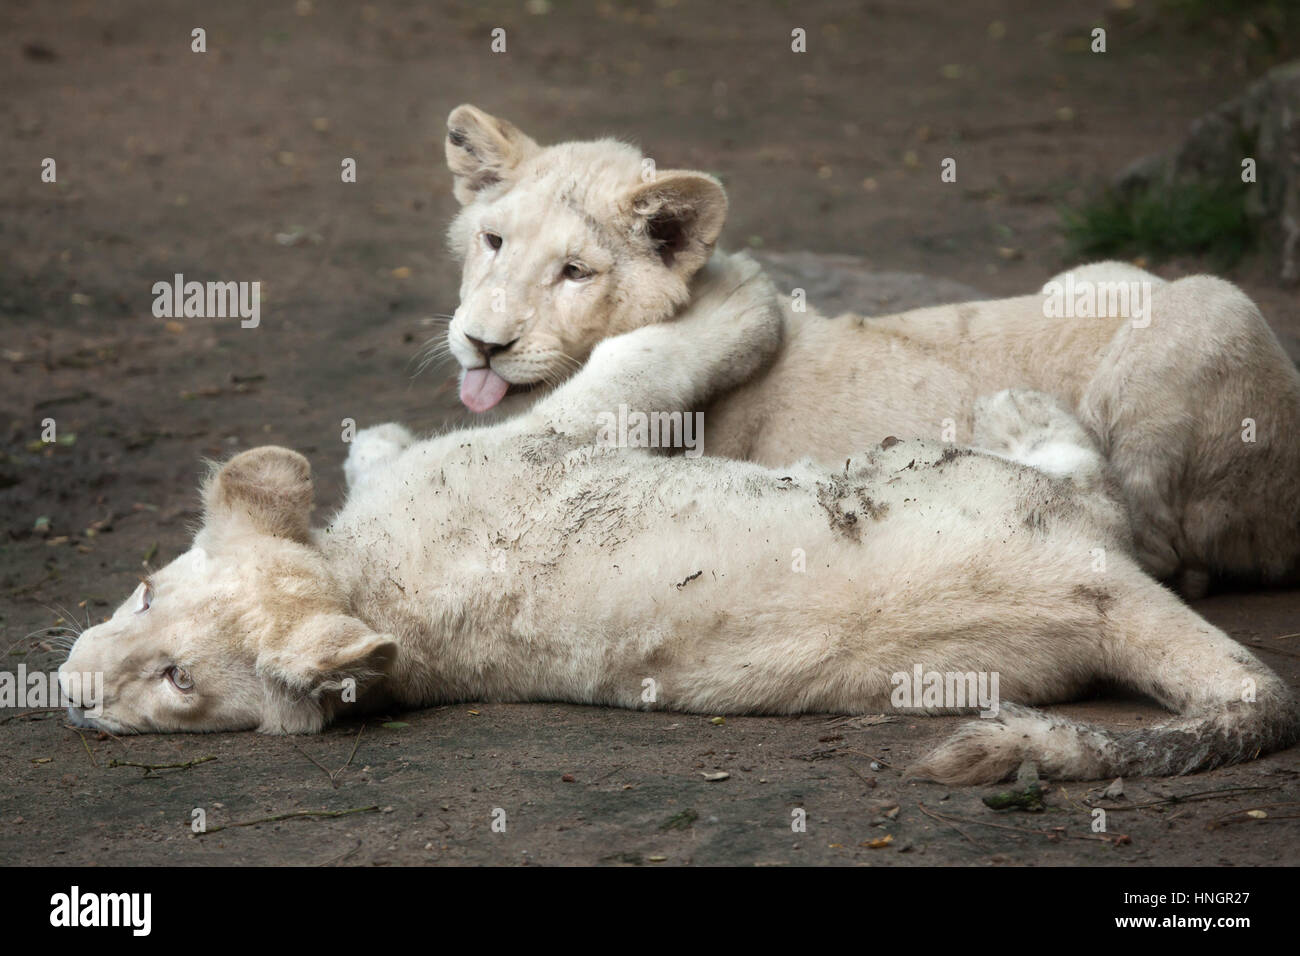 Two newborn white lion cubs at La Fleche Zoo in the Loire Valley, France. The white lion is a colour mutation of the Transvaal lion (Panthera leo krugeri), also known as the Southeast African lion or Kalahari lion. Two white lion cubs were born on December 2, 2015. Stock Photo